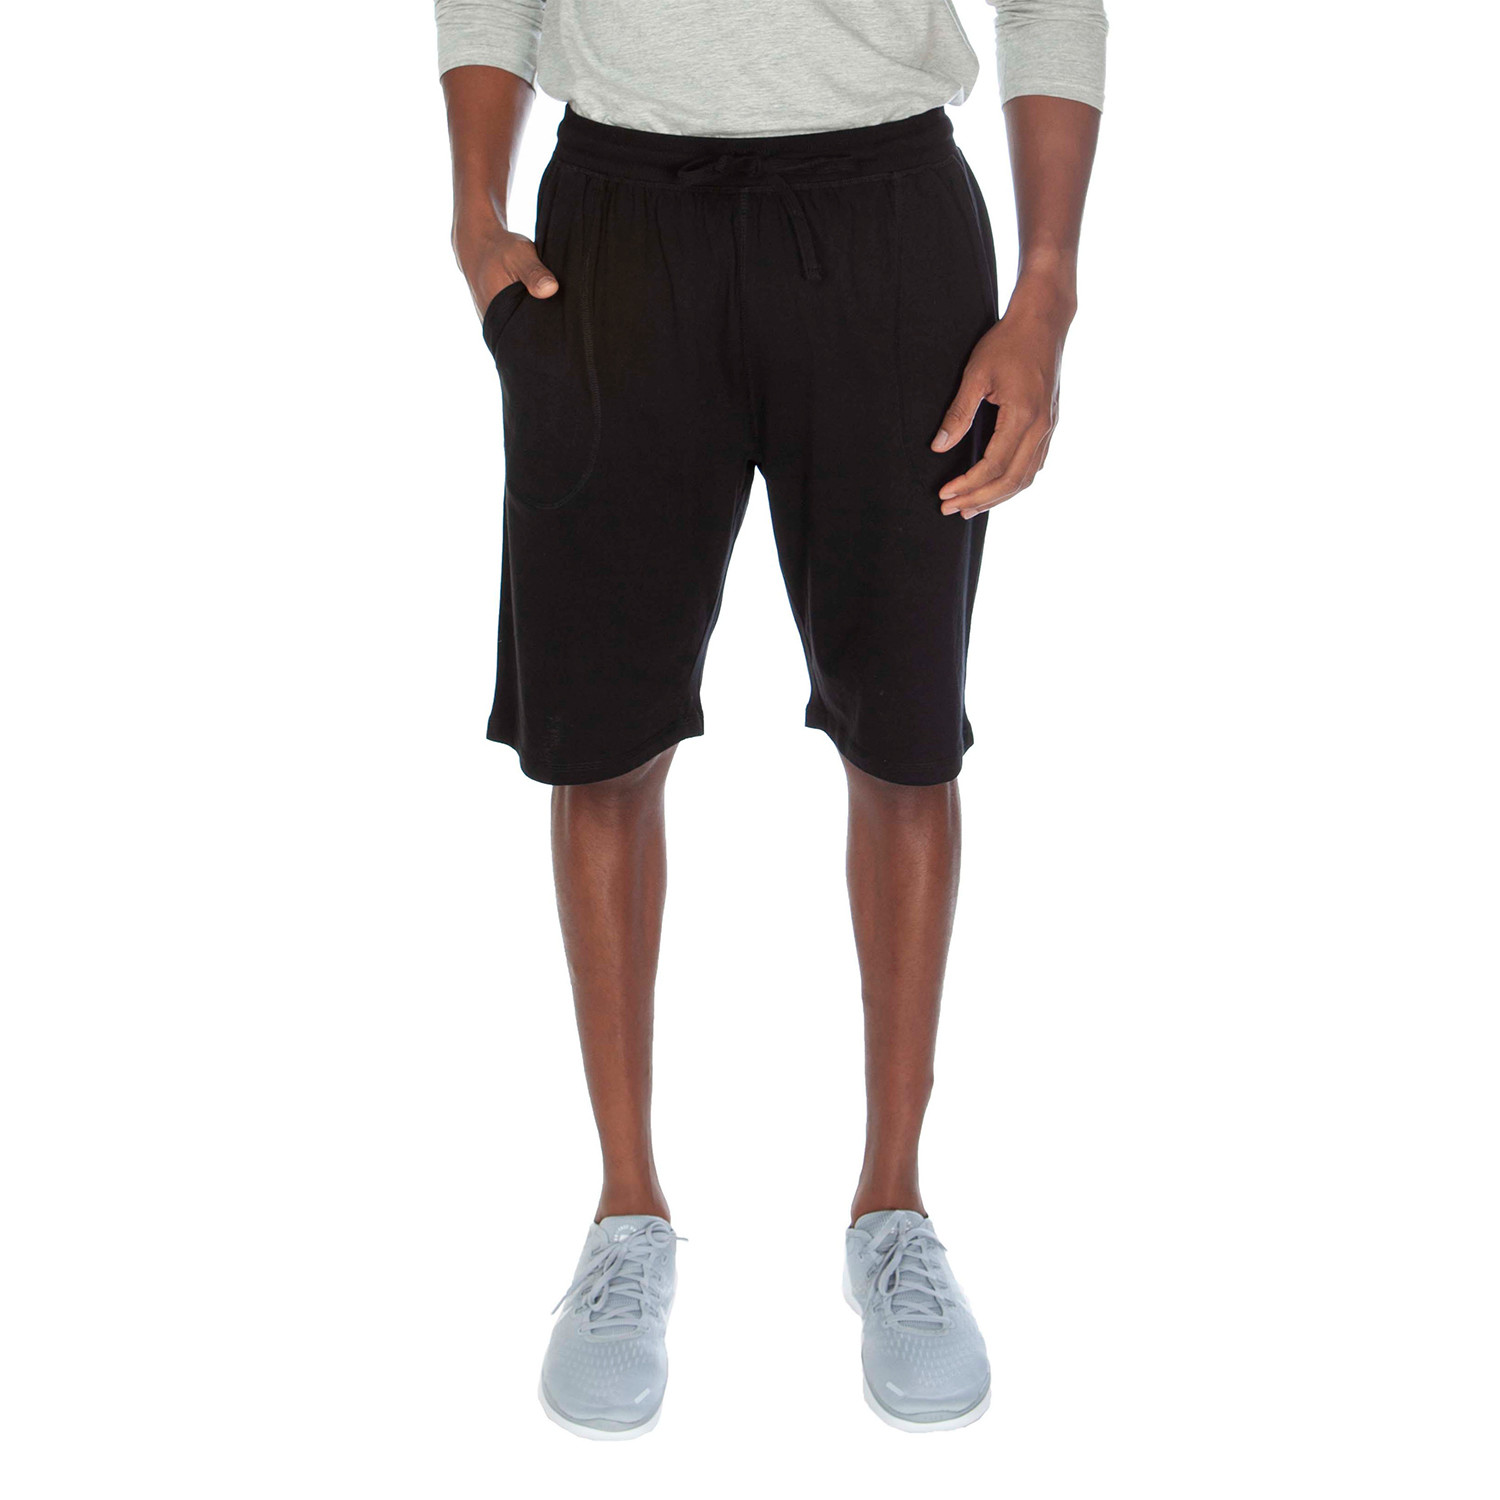 Super Soft Lounge Short // Black (S) - Unsimply Stitched - Touch of Modern